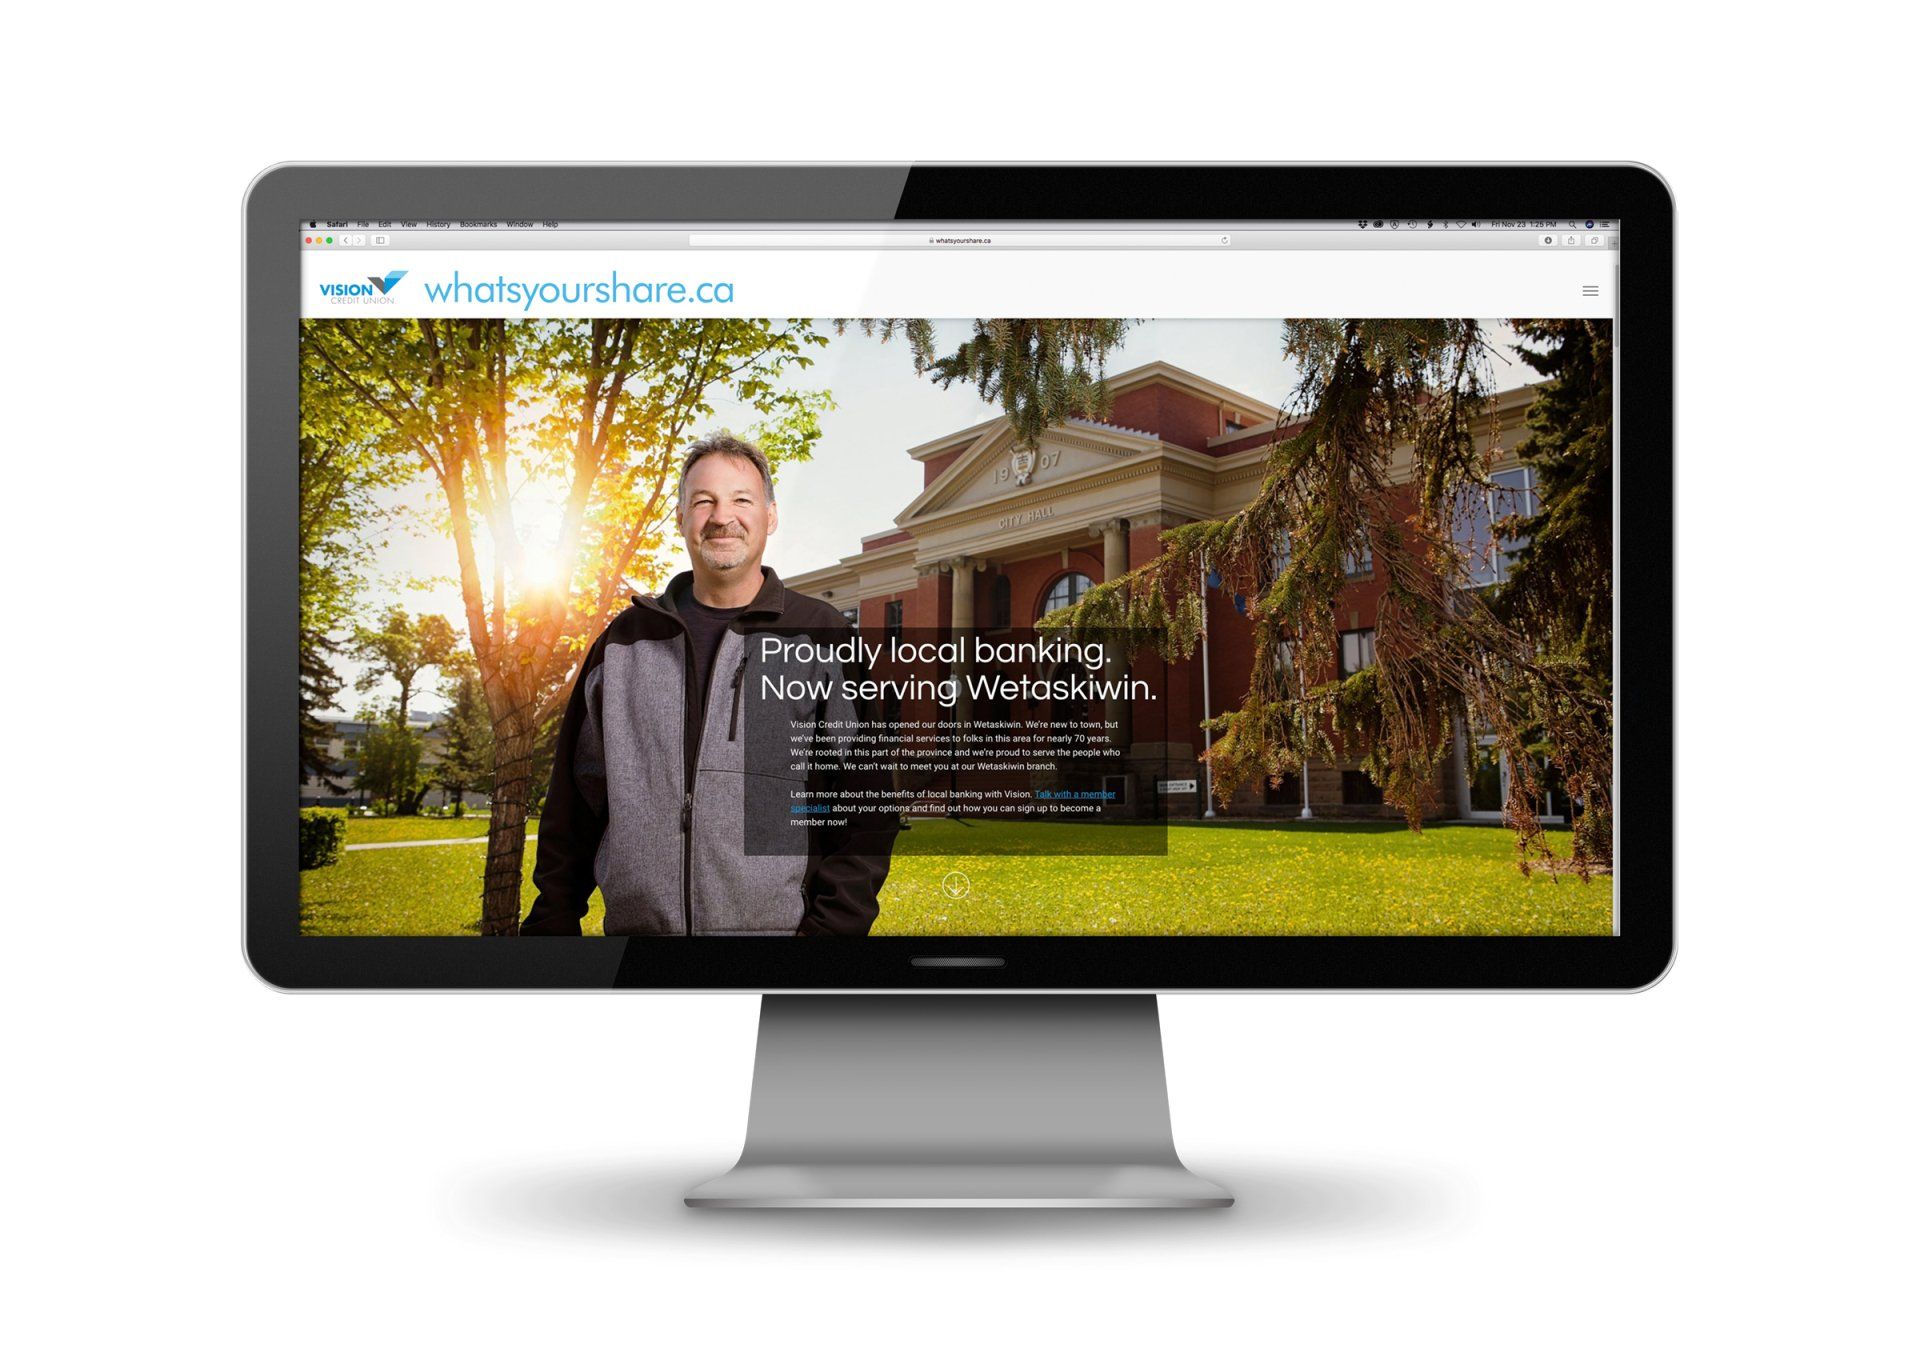 MARKETING CAMPAIGN LANDING PAGE FOR VISION CREDIT UNION BY IVY DESIGN INC